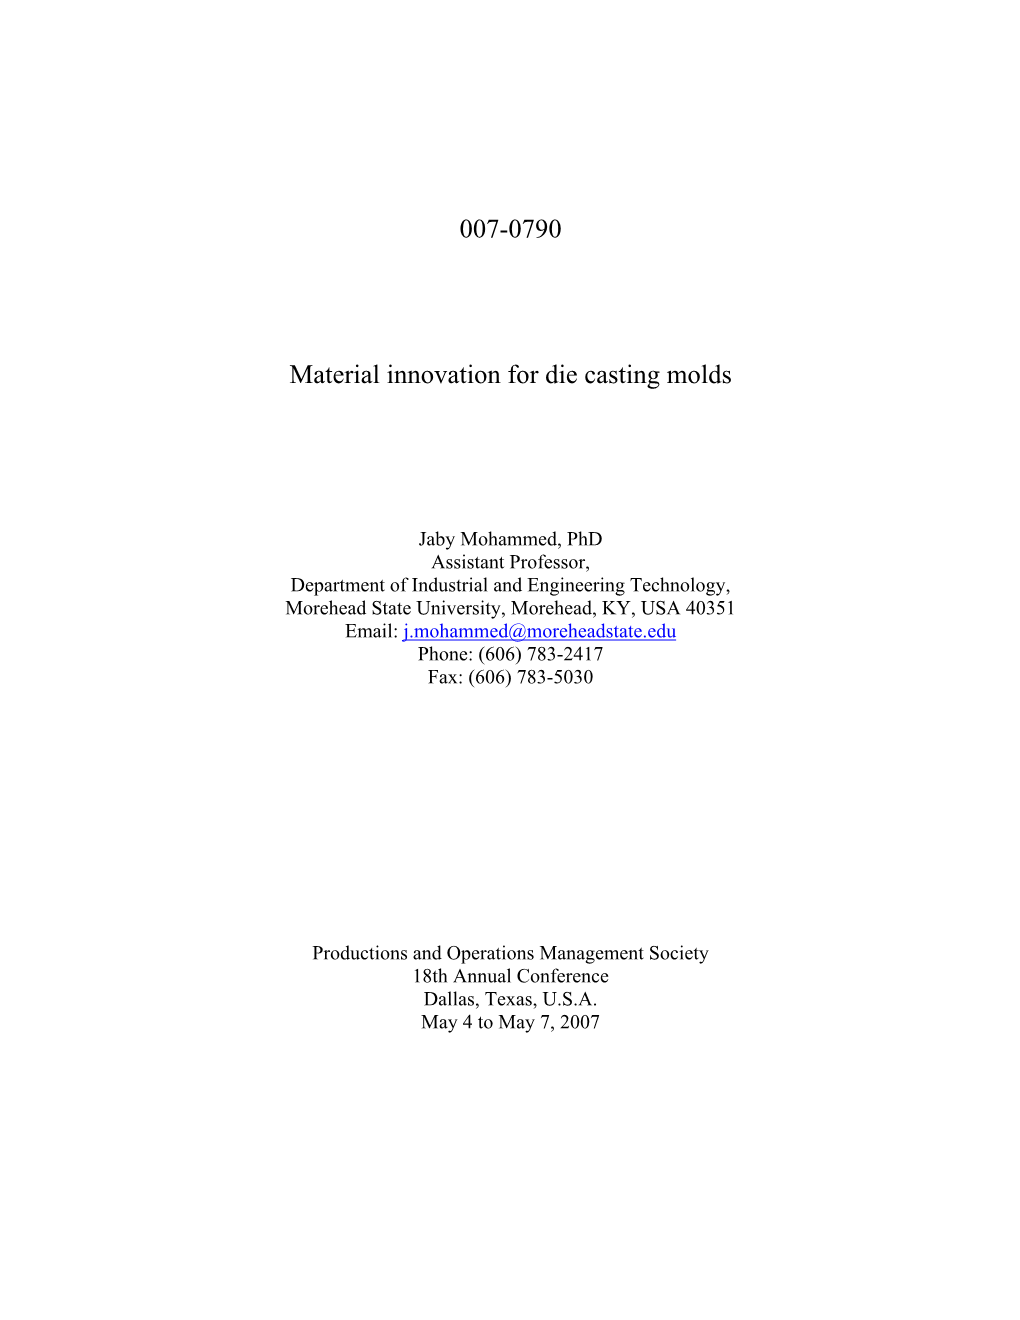 007-0790 Material Innovation for Die Casting Molds